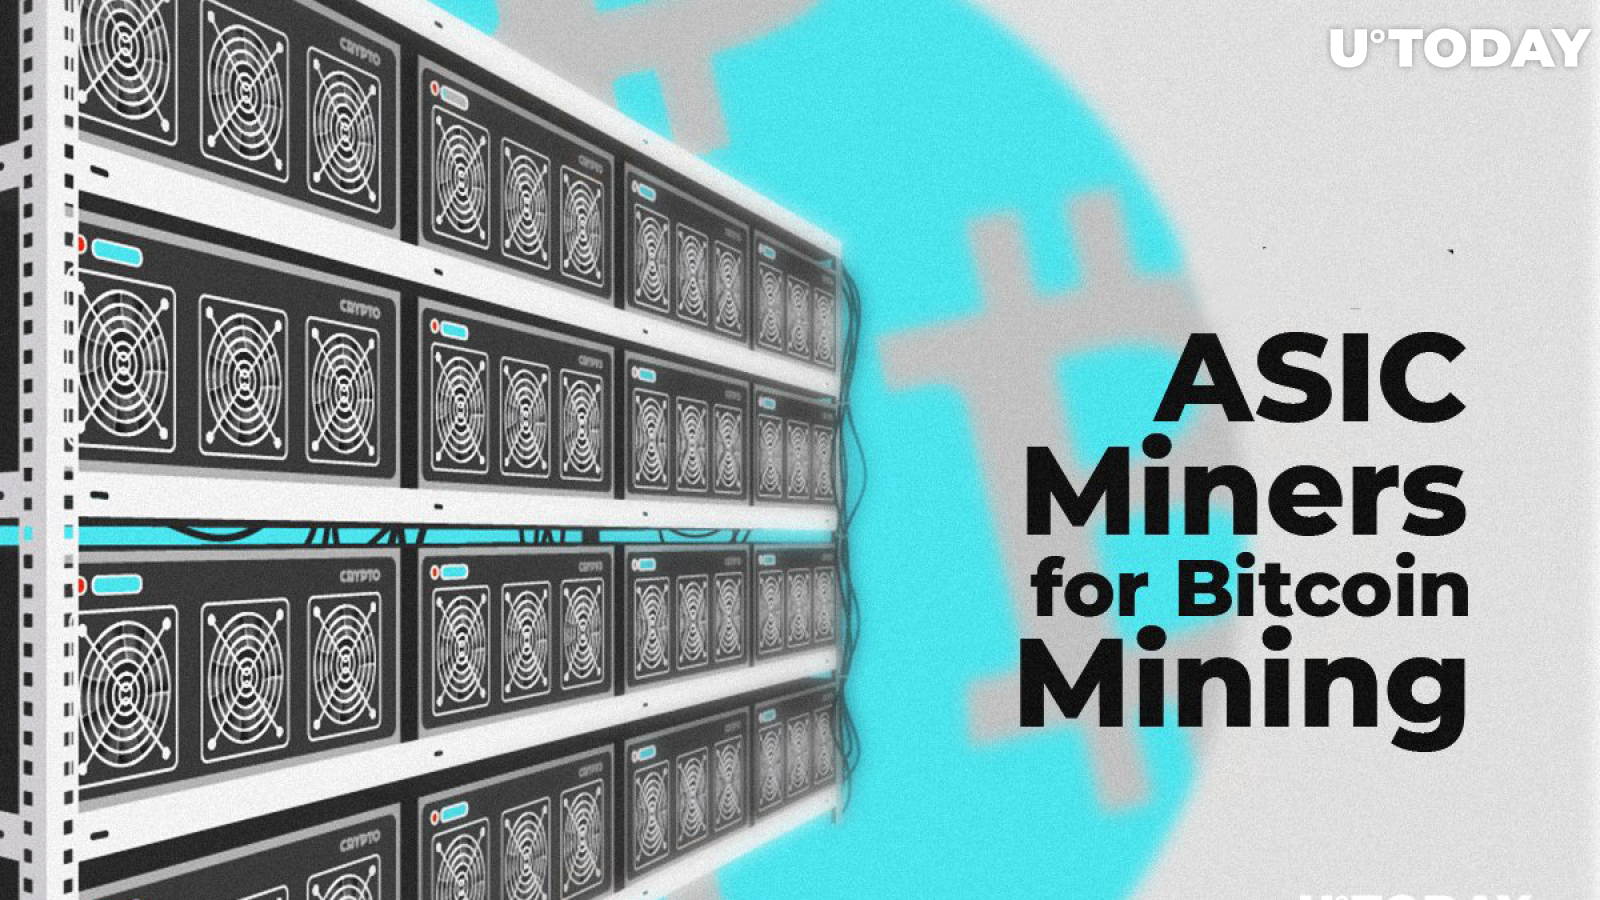 5 Popular ASIC Miners for Bitcoin Mining in 2019